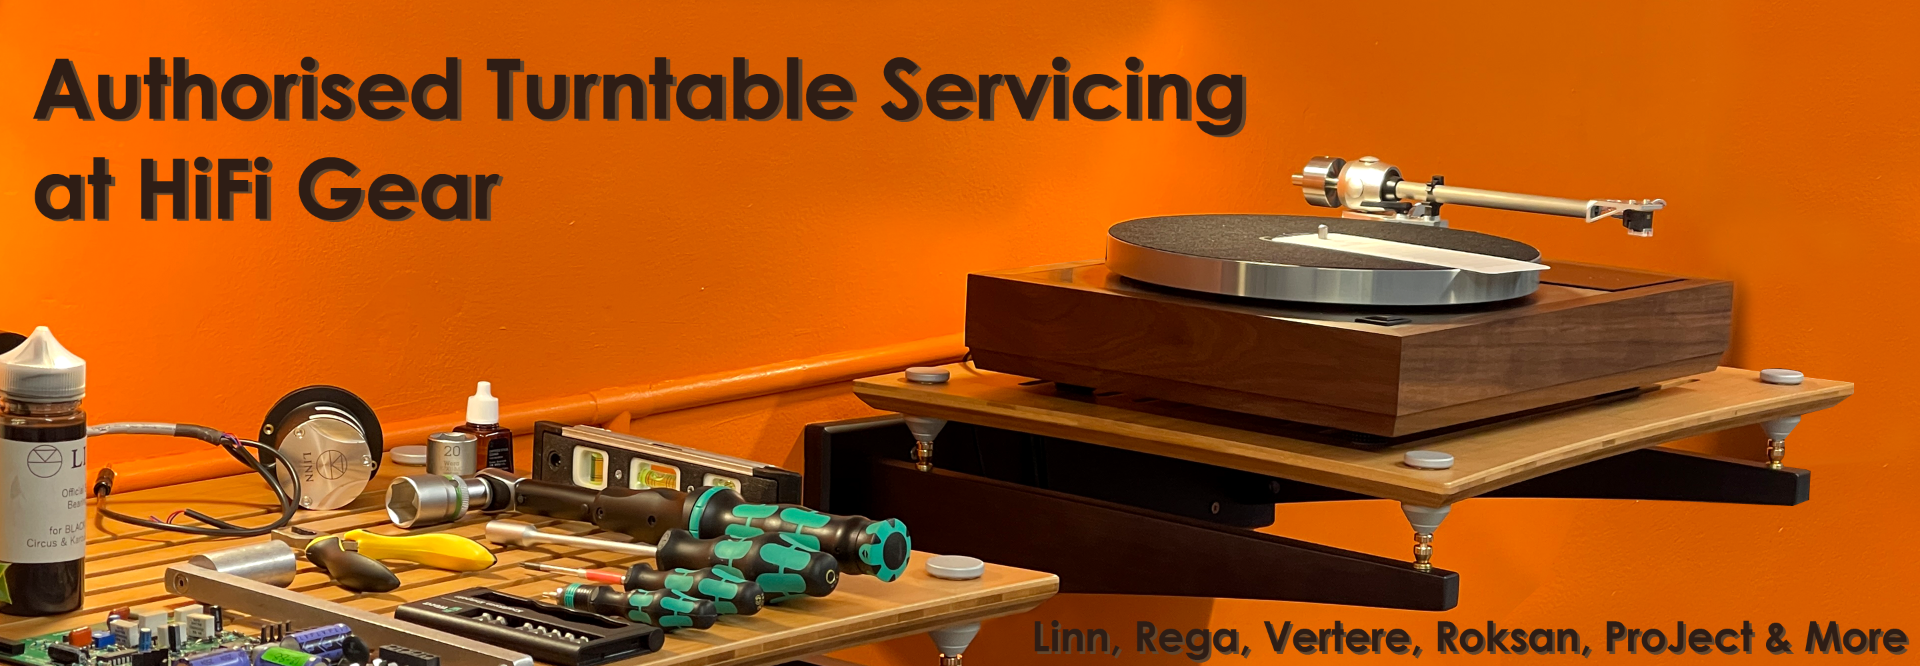 Turntable Servicing